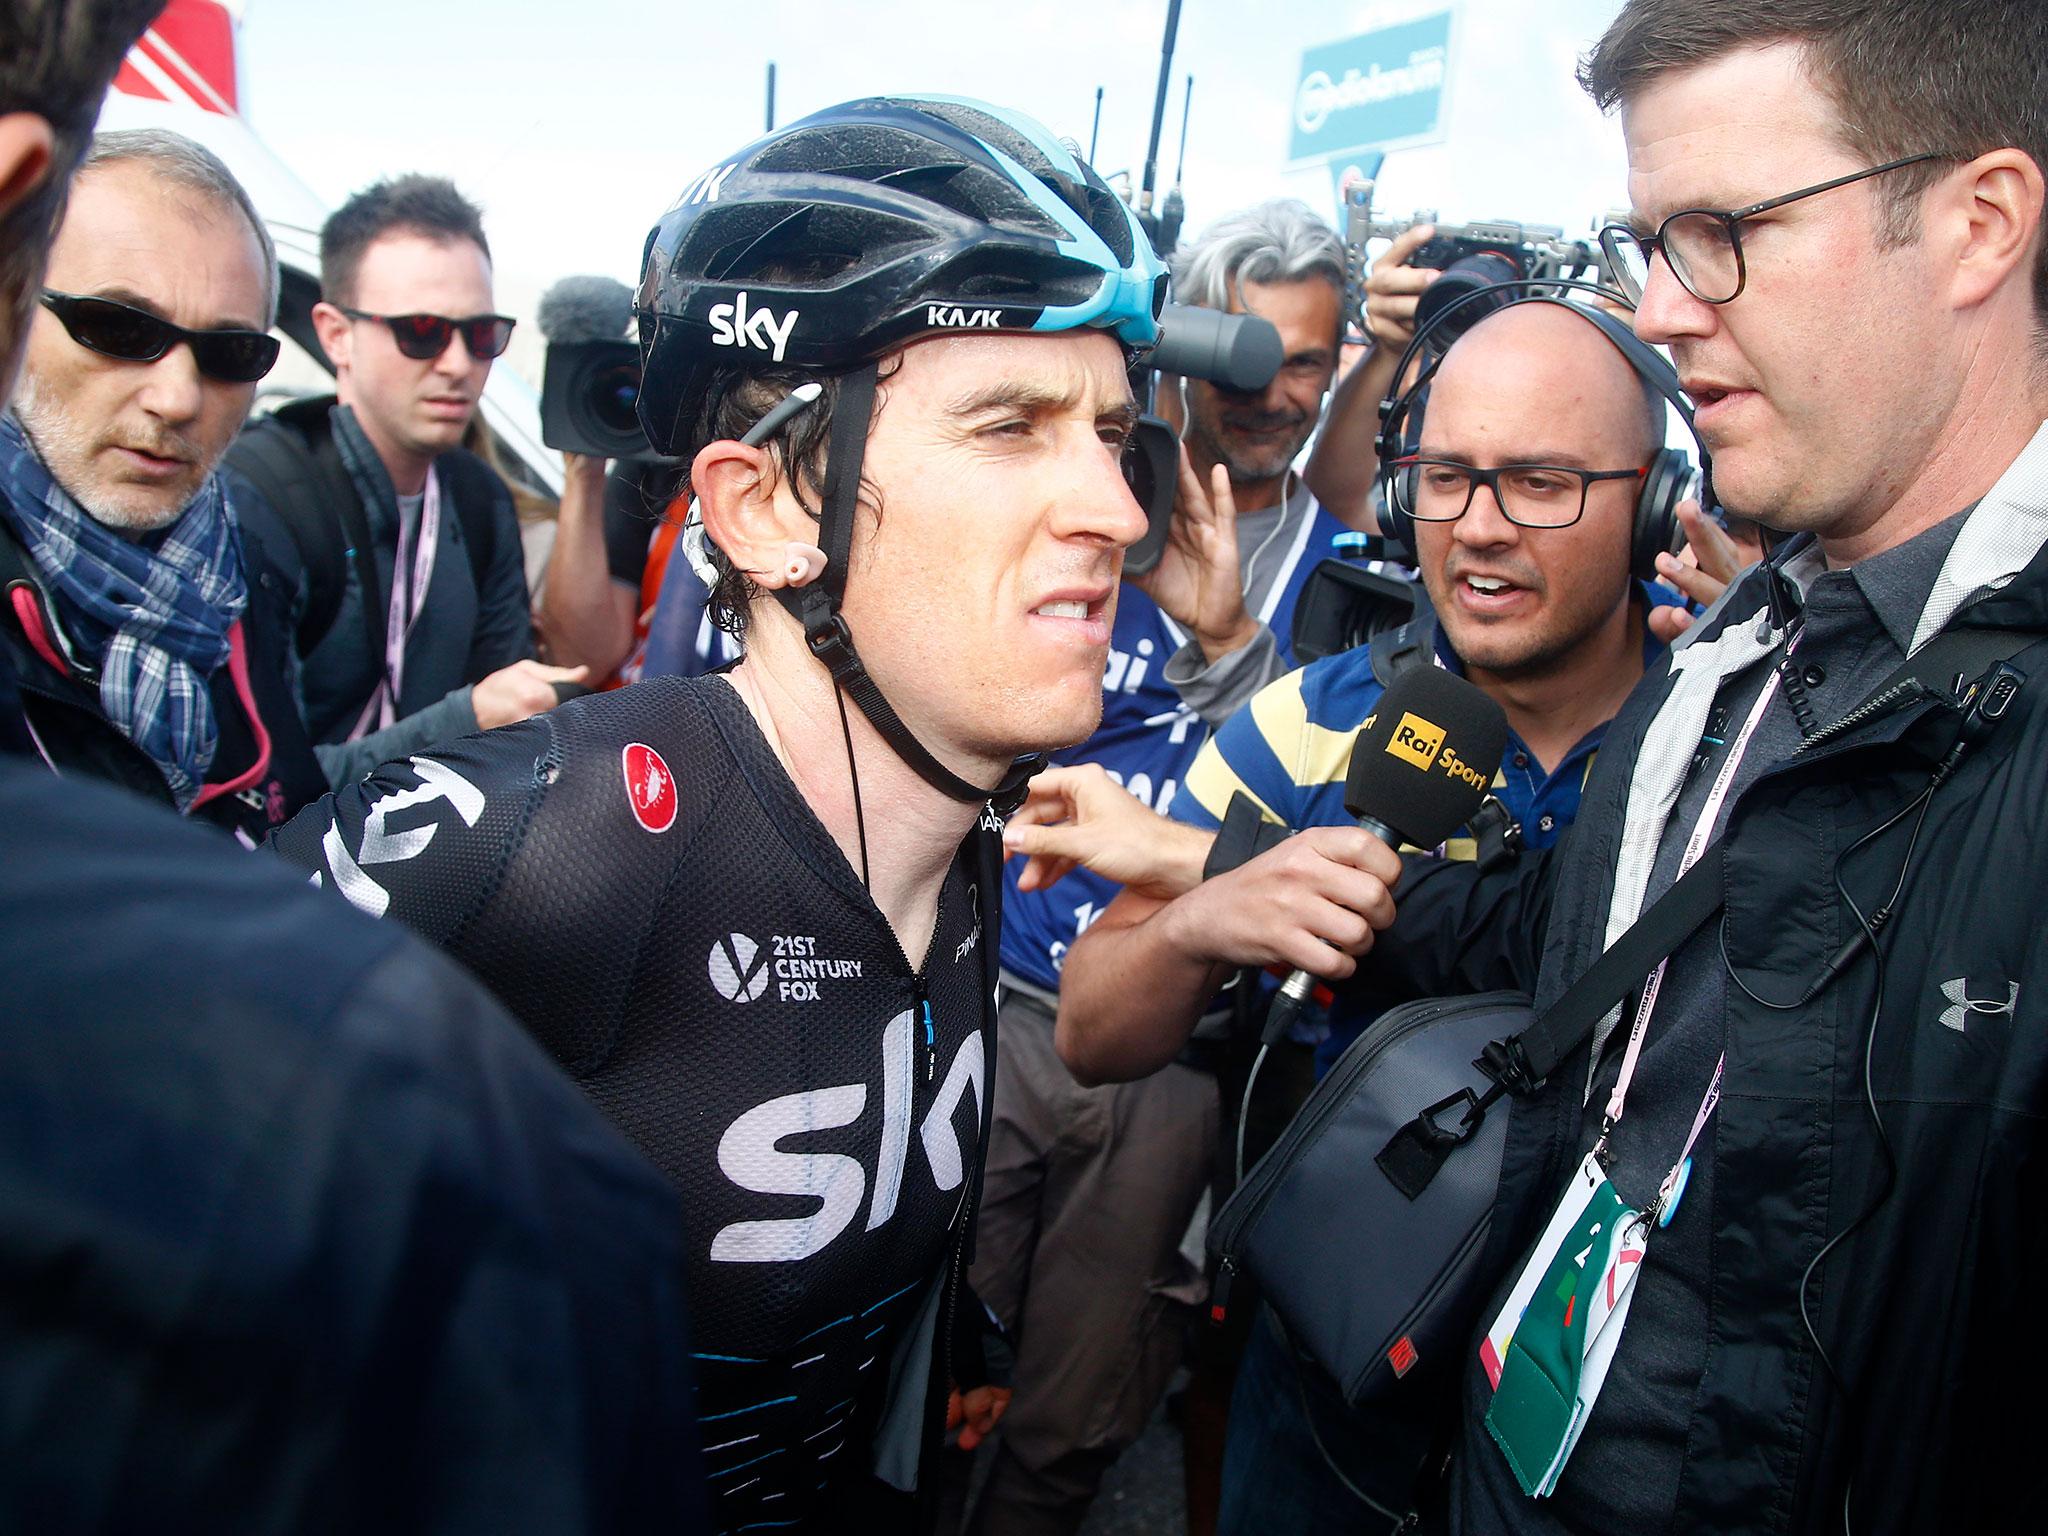 Geraint Thomas hit out against the race organisers